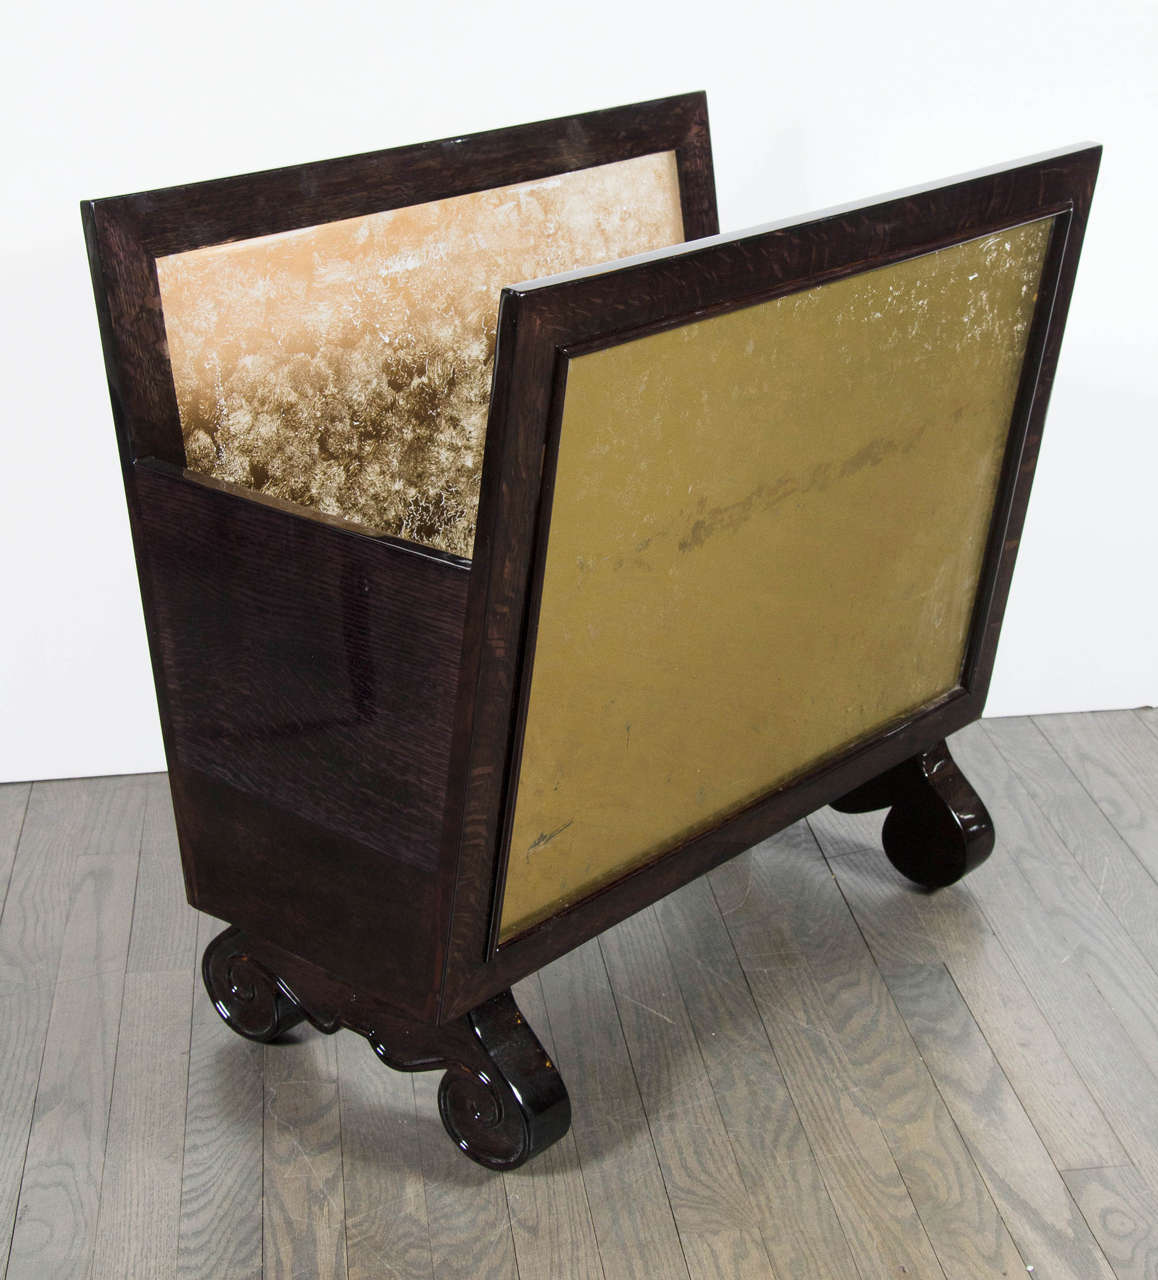 This unique Mid-Century Modernist reverse pained ebonized walnut log holder features two elongated side panels set an angle of reversed painted glass in mottled gold on the insides. These reverse painted panels are framed within ebonized walnut